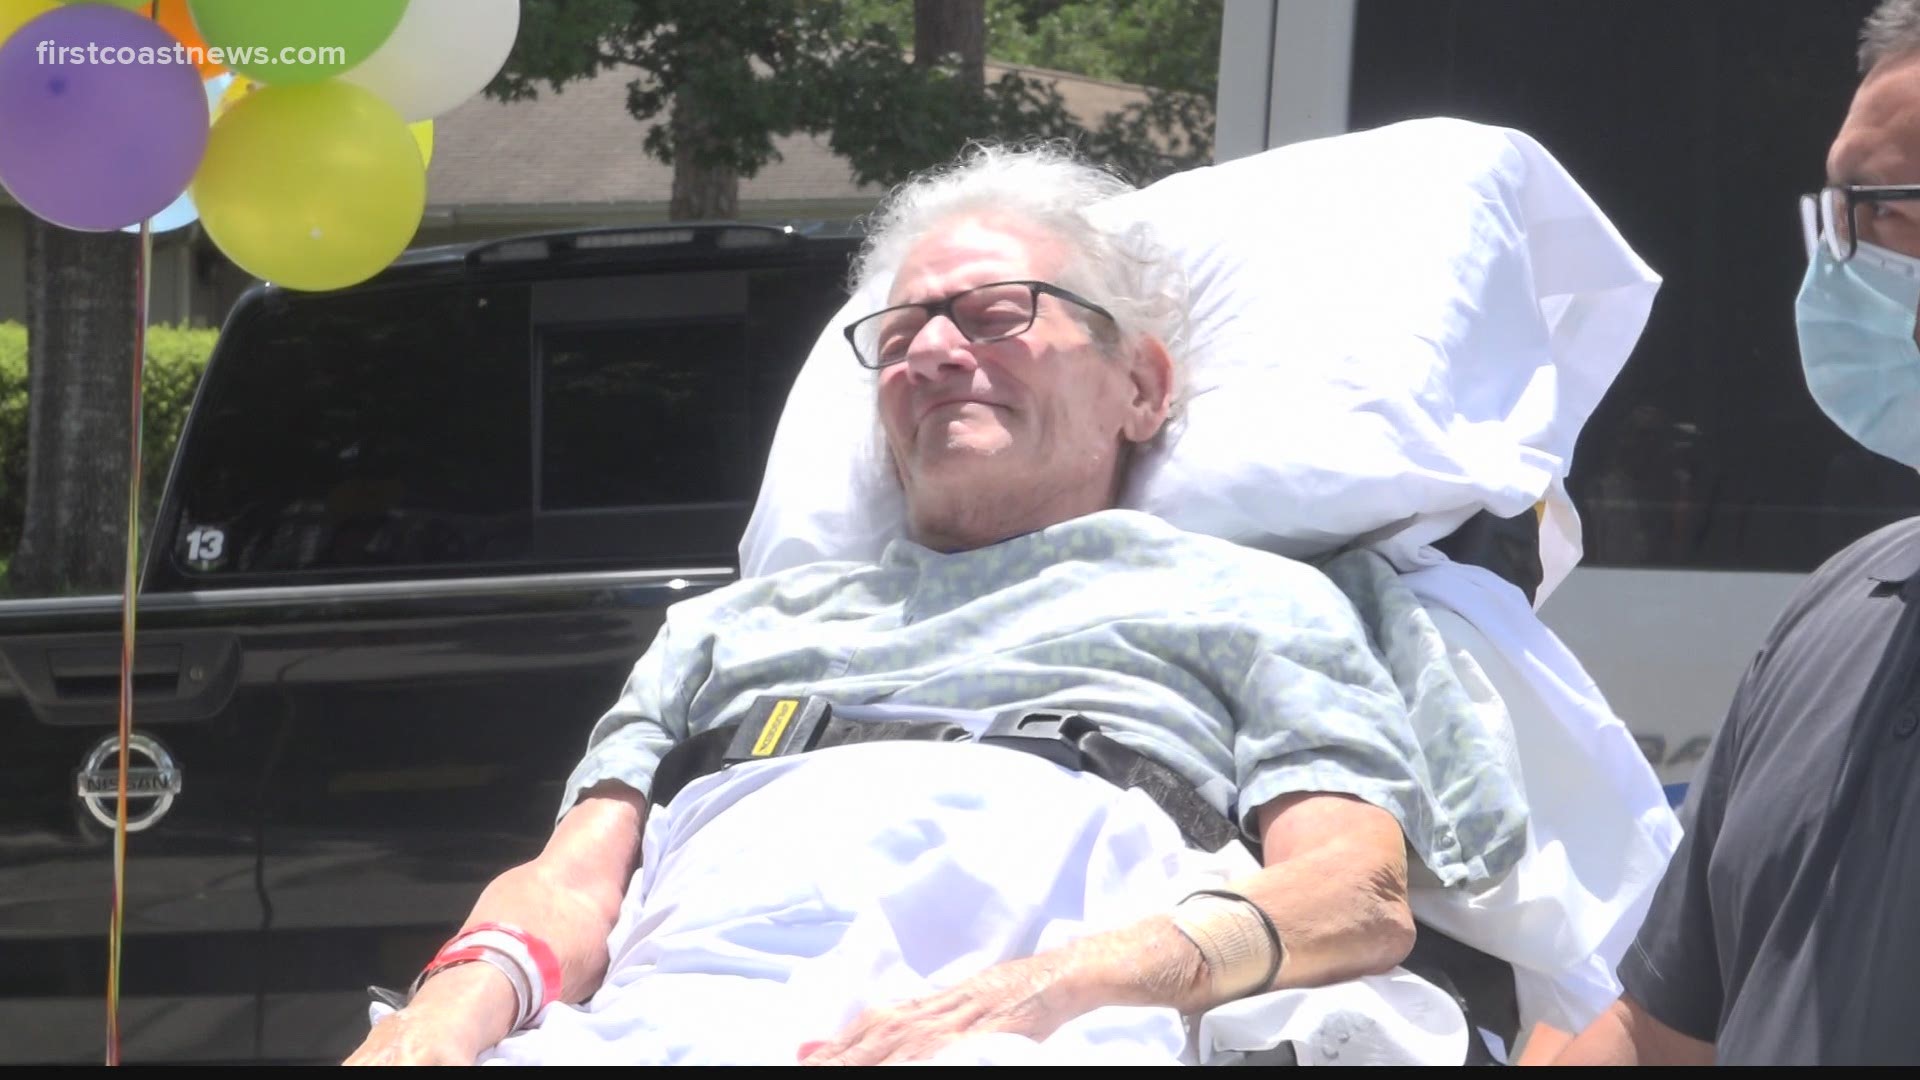 Chuck Davis was diagnosed with COVID-19 last Thanksgiving. He returned home Tuesday.